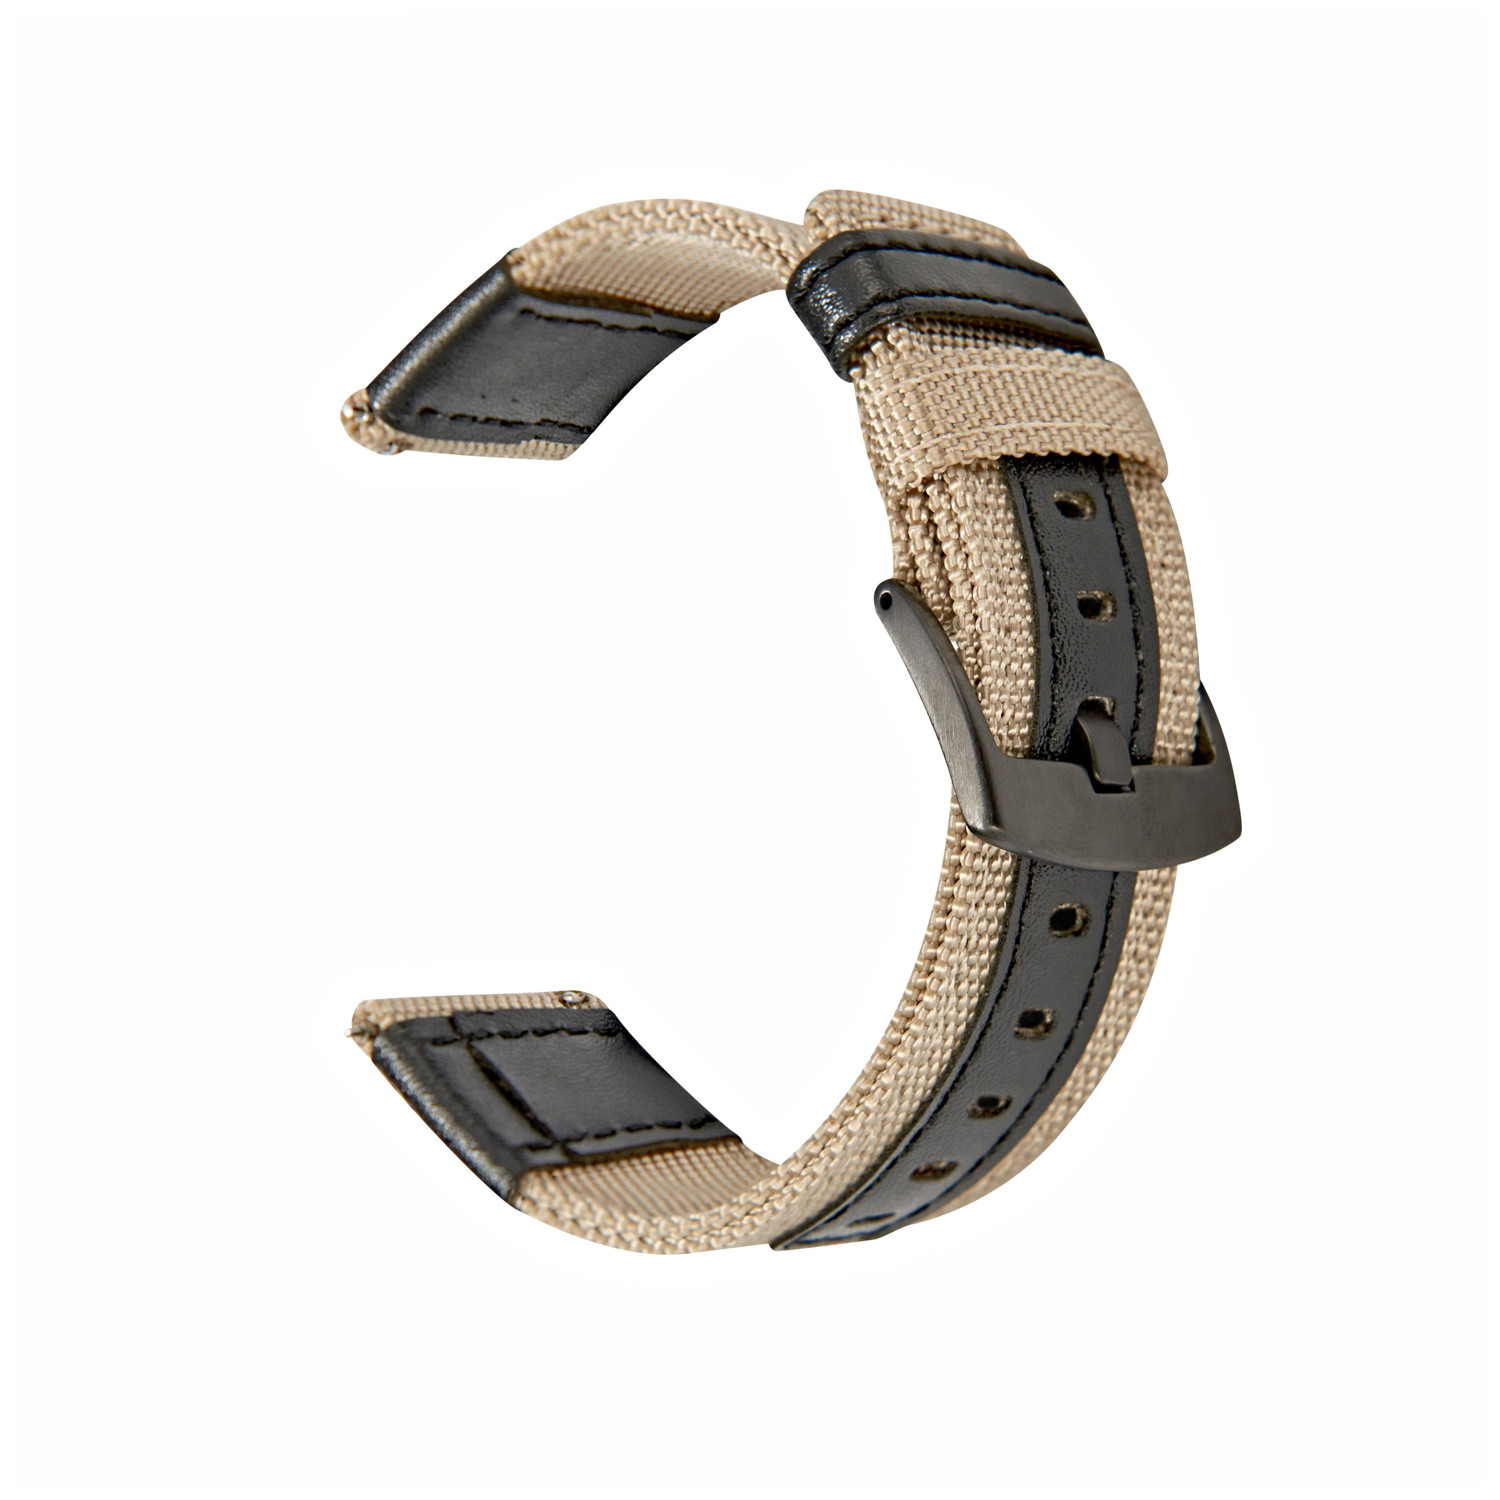 Bakeey-2022mm-Width-Canvas-Nylon-Woven--Leather-Watch-Band-Strap-Replacement-for-Samsung-Gear-S3-Hua-1773675-14